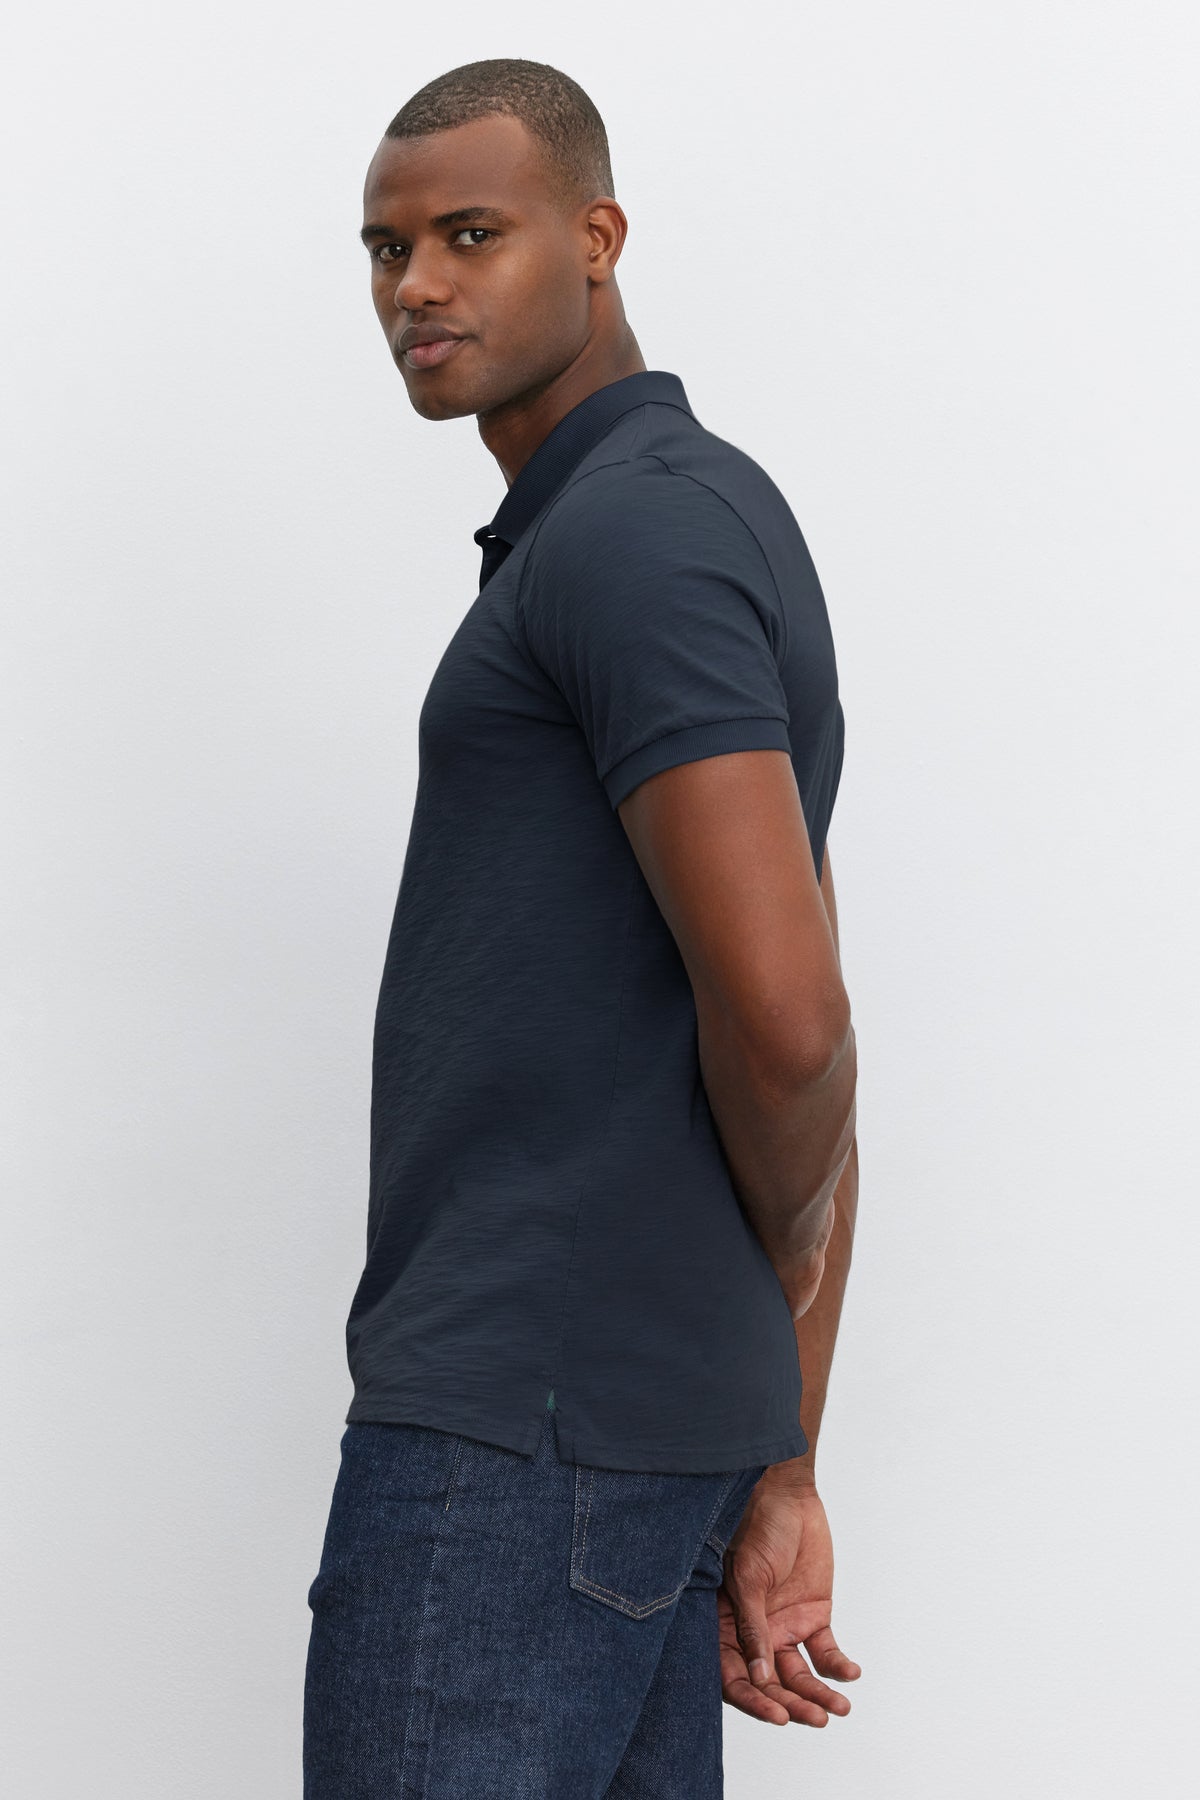 A man wearing a dark NIKO POLO by Velvet by Graham & Spencer shirt and jeans, standing sideways, looking over his shoulder with a neutral expression.-36890752778433